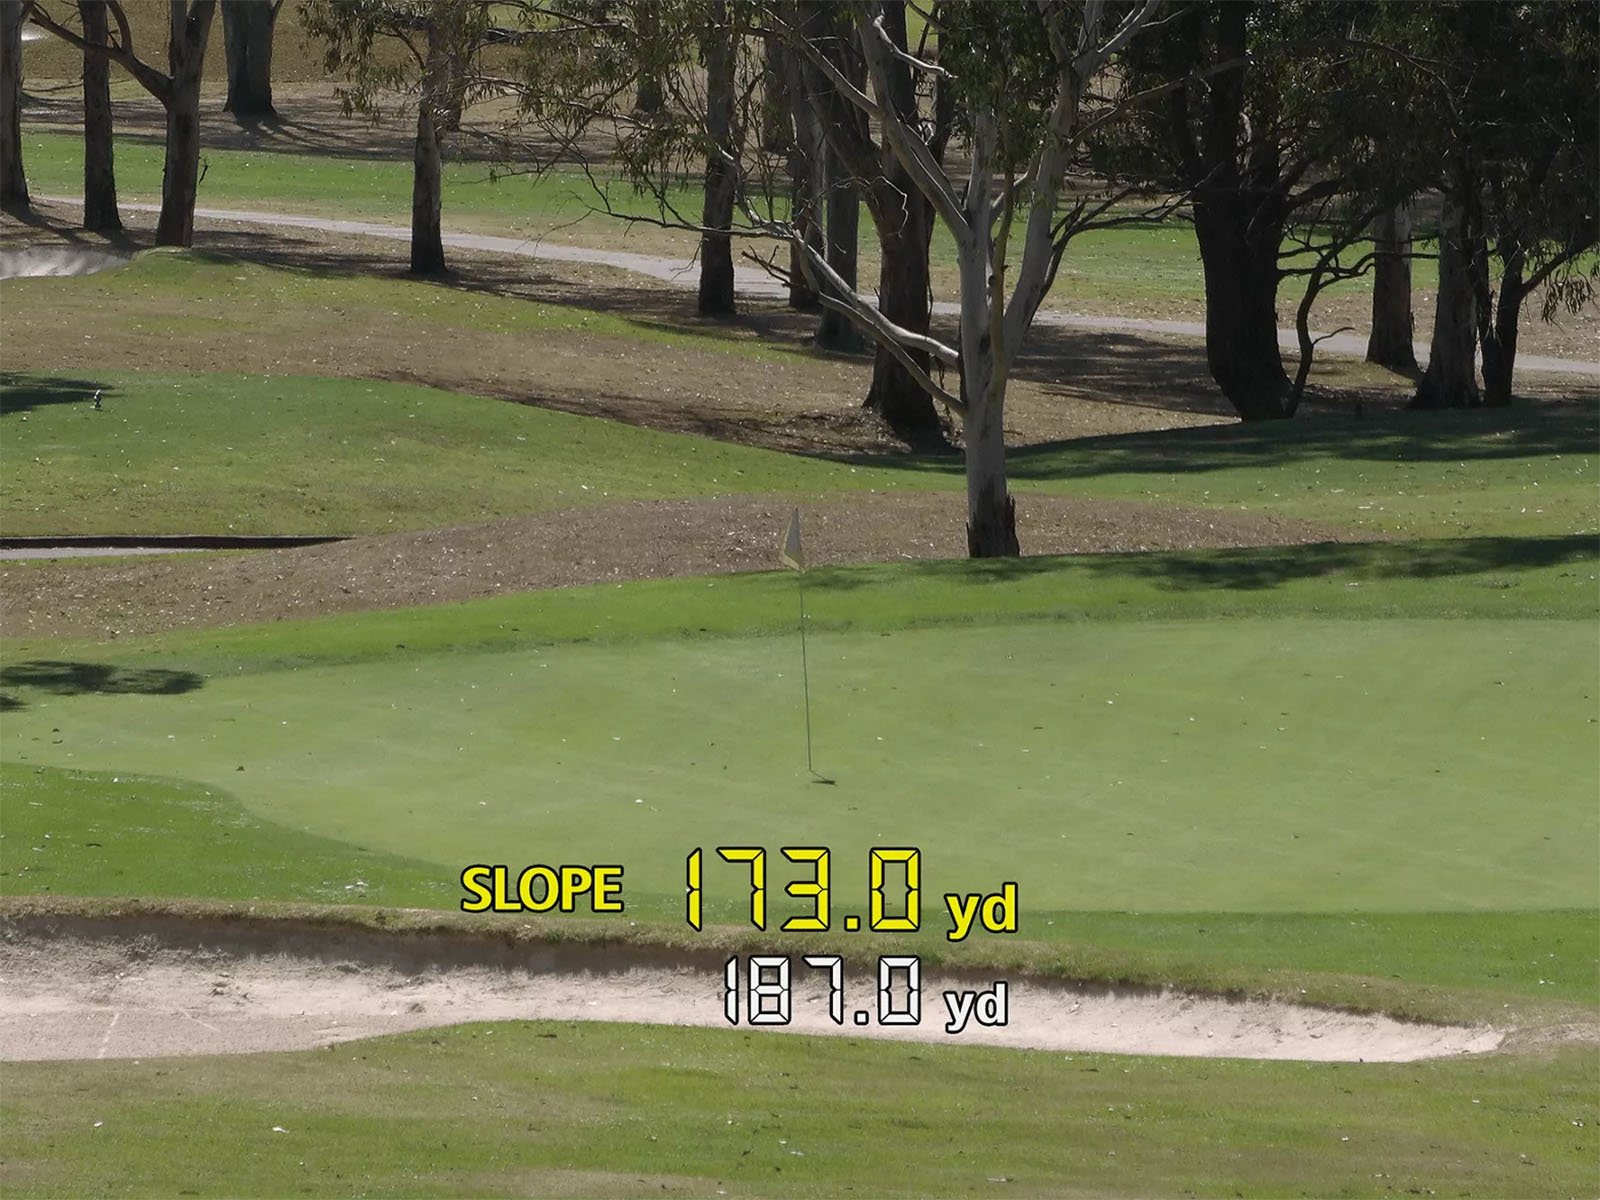 A golf course view featuring a green surrounded by trees. A yellow text overlay indicates "SLOPE" with a numerical value of "173.0 yd," and below it in white text, "187.0 yd" is shown.